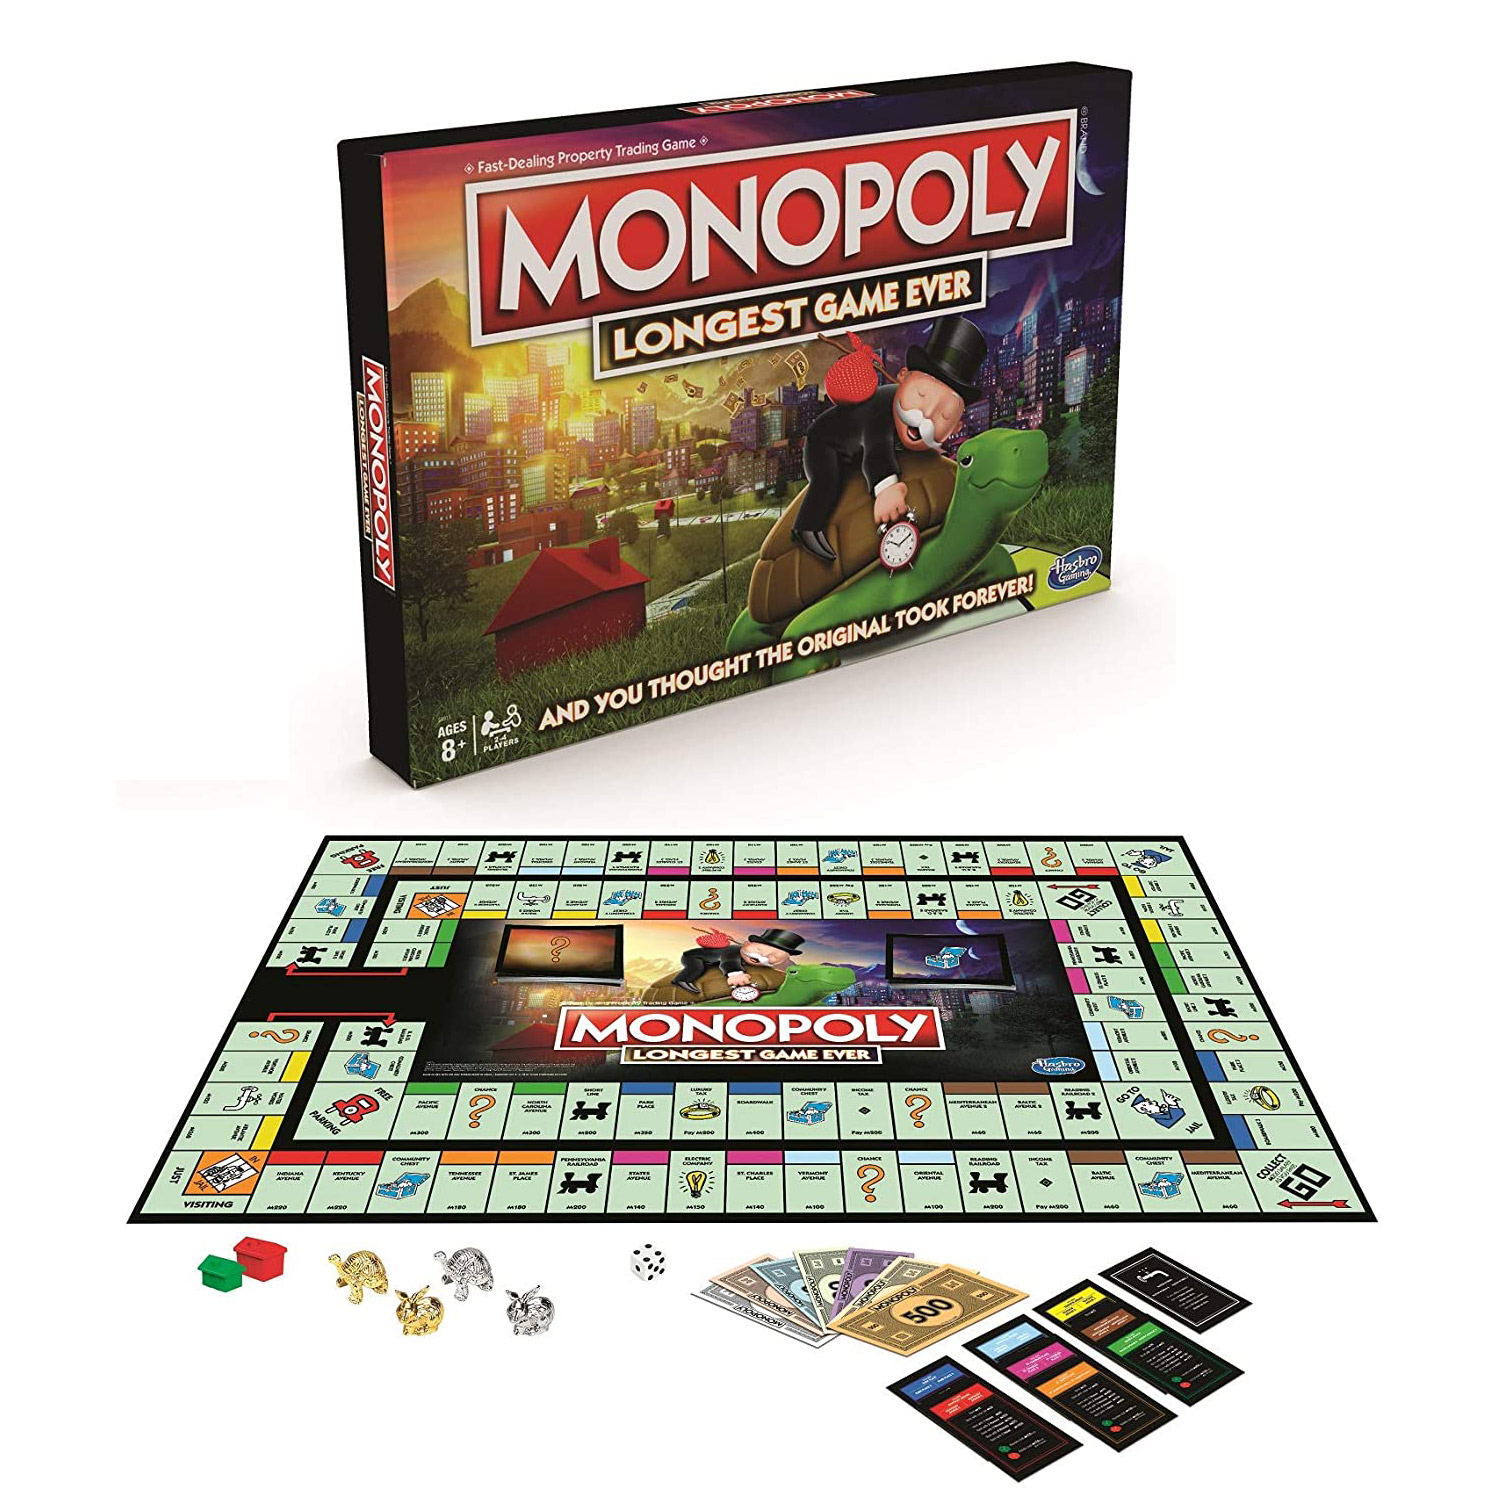 Fast Shipping Brand New Monopoly Longest Game Ever Board game 